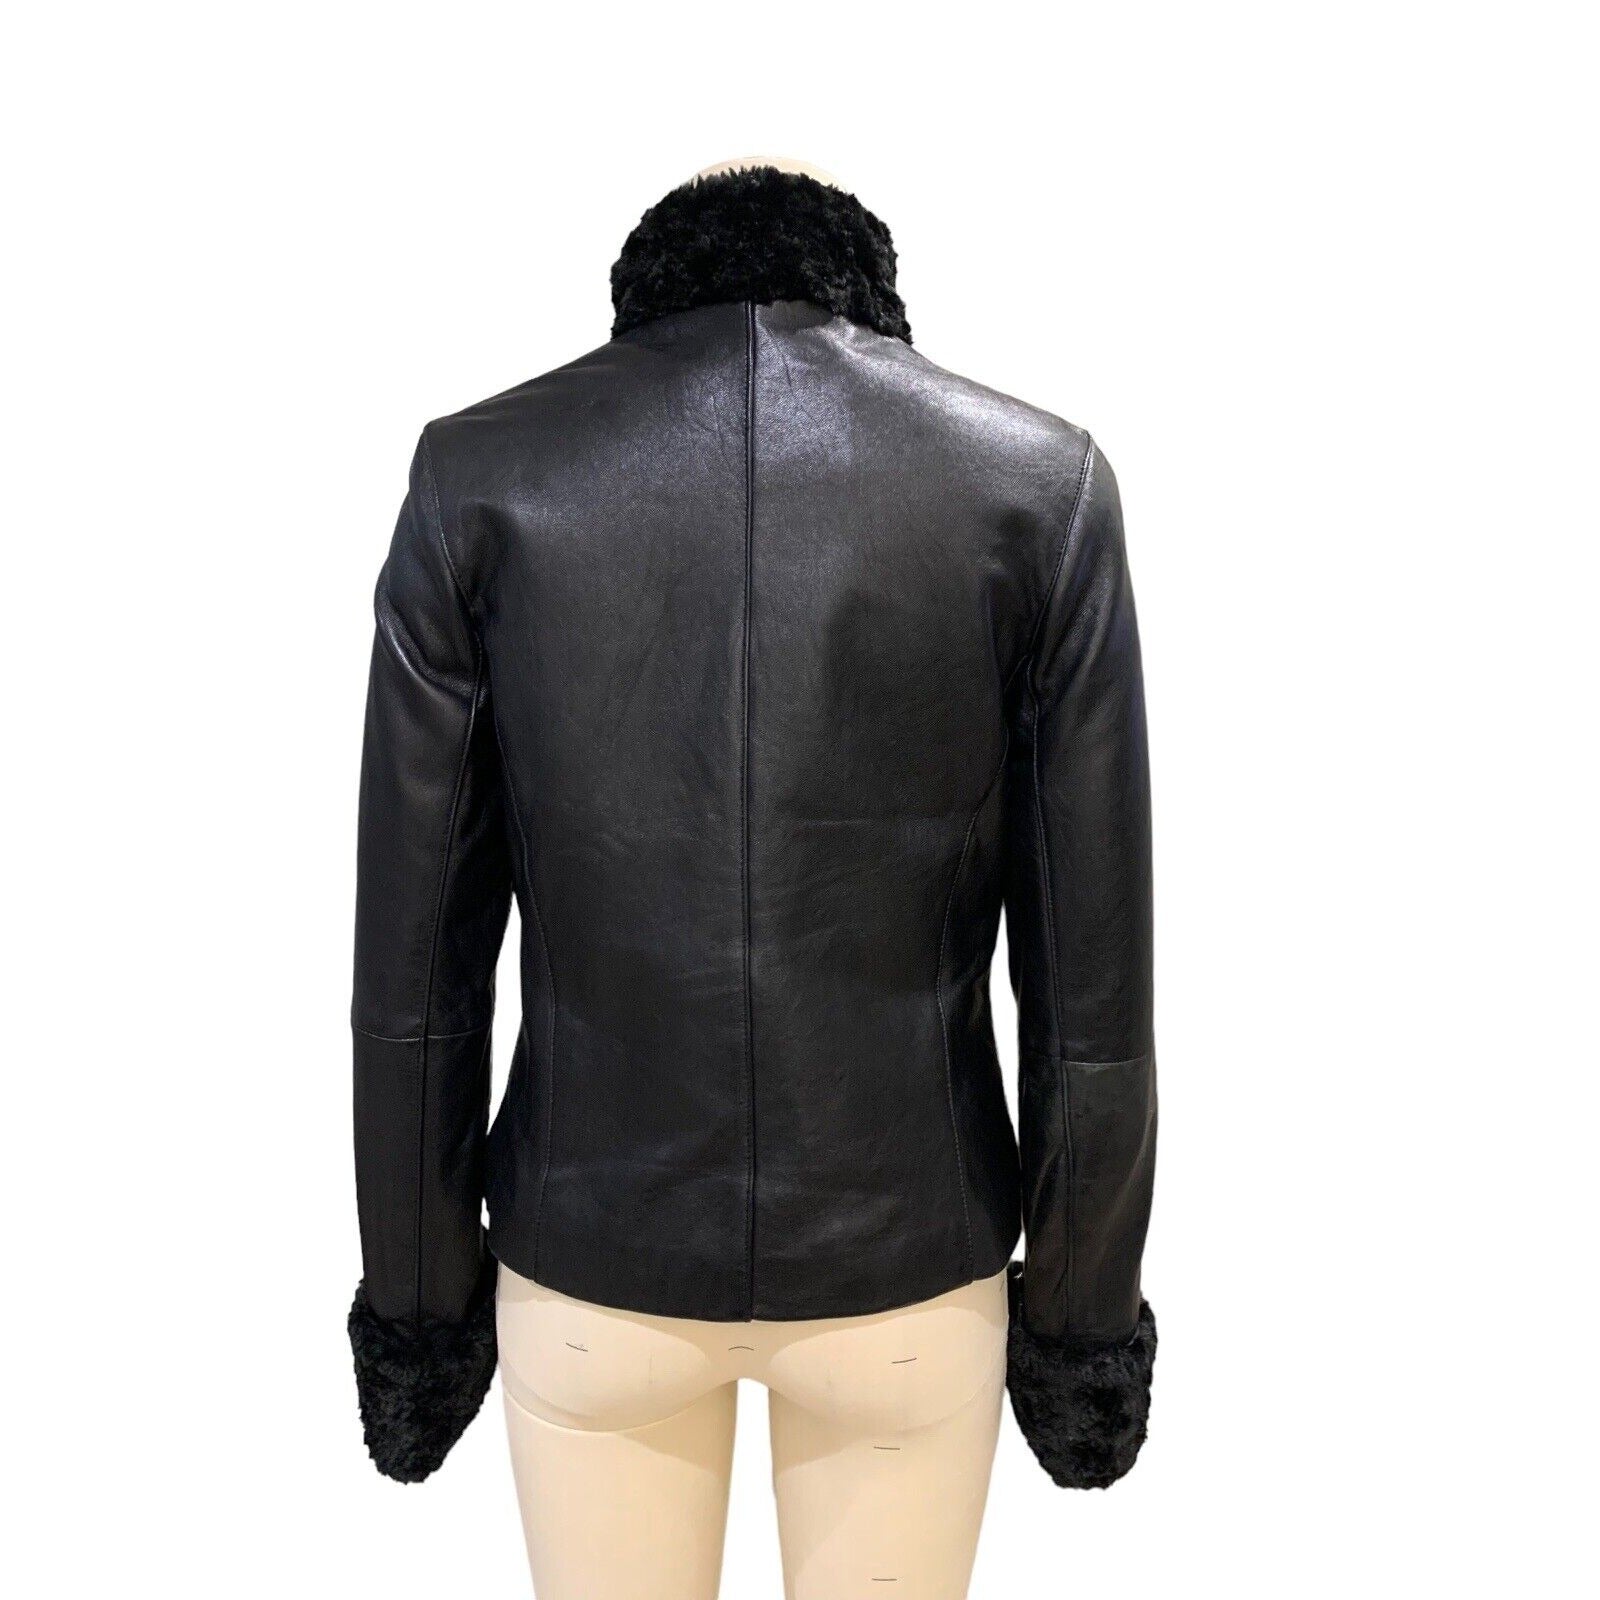 Back Of Women's Leather Jacket With Faux Fur Trim